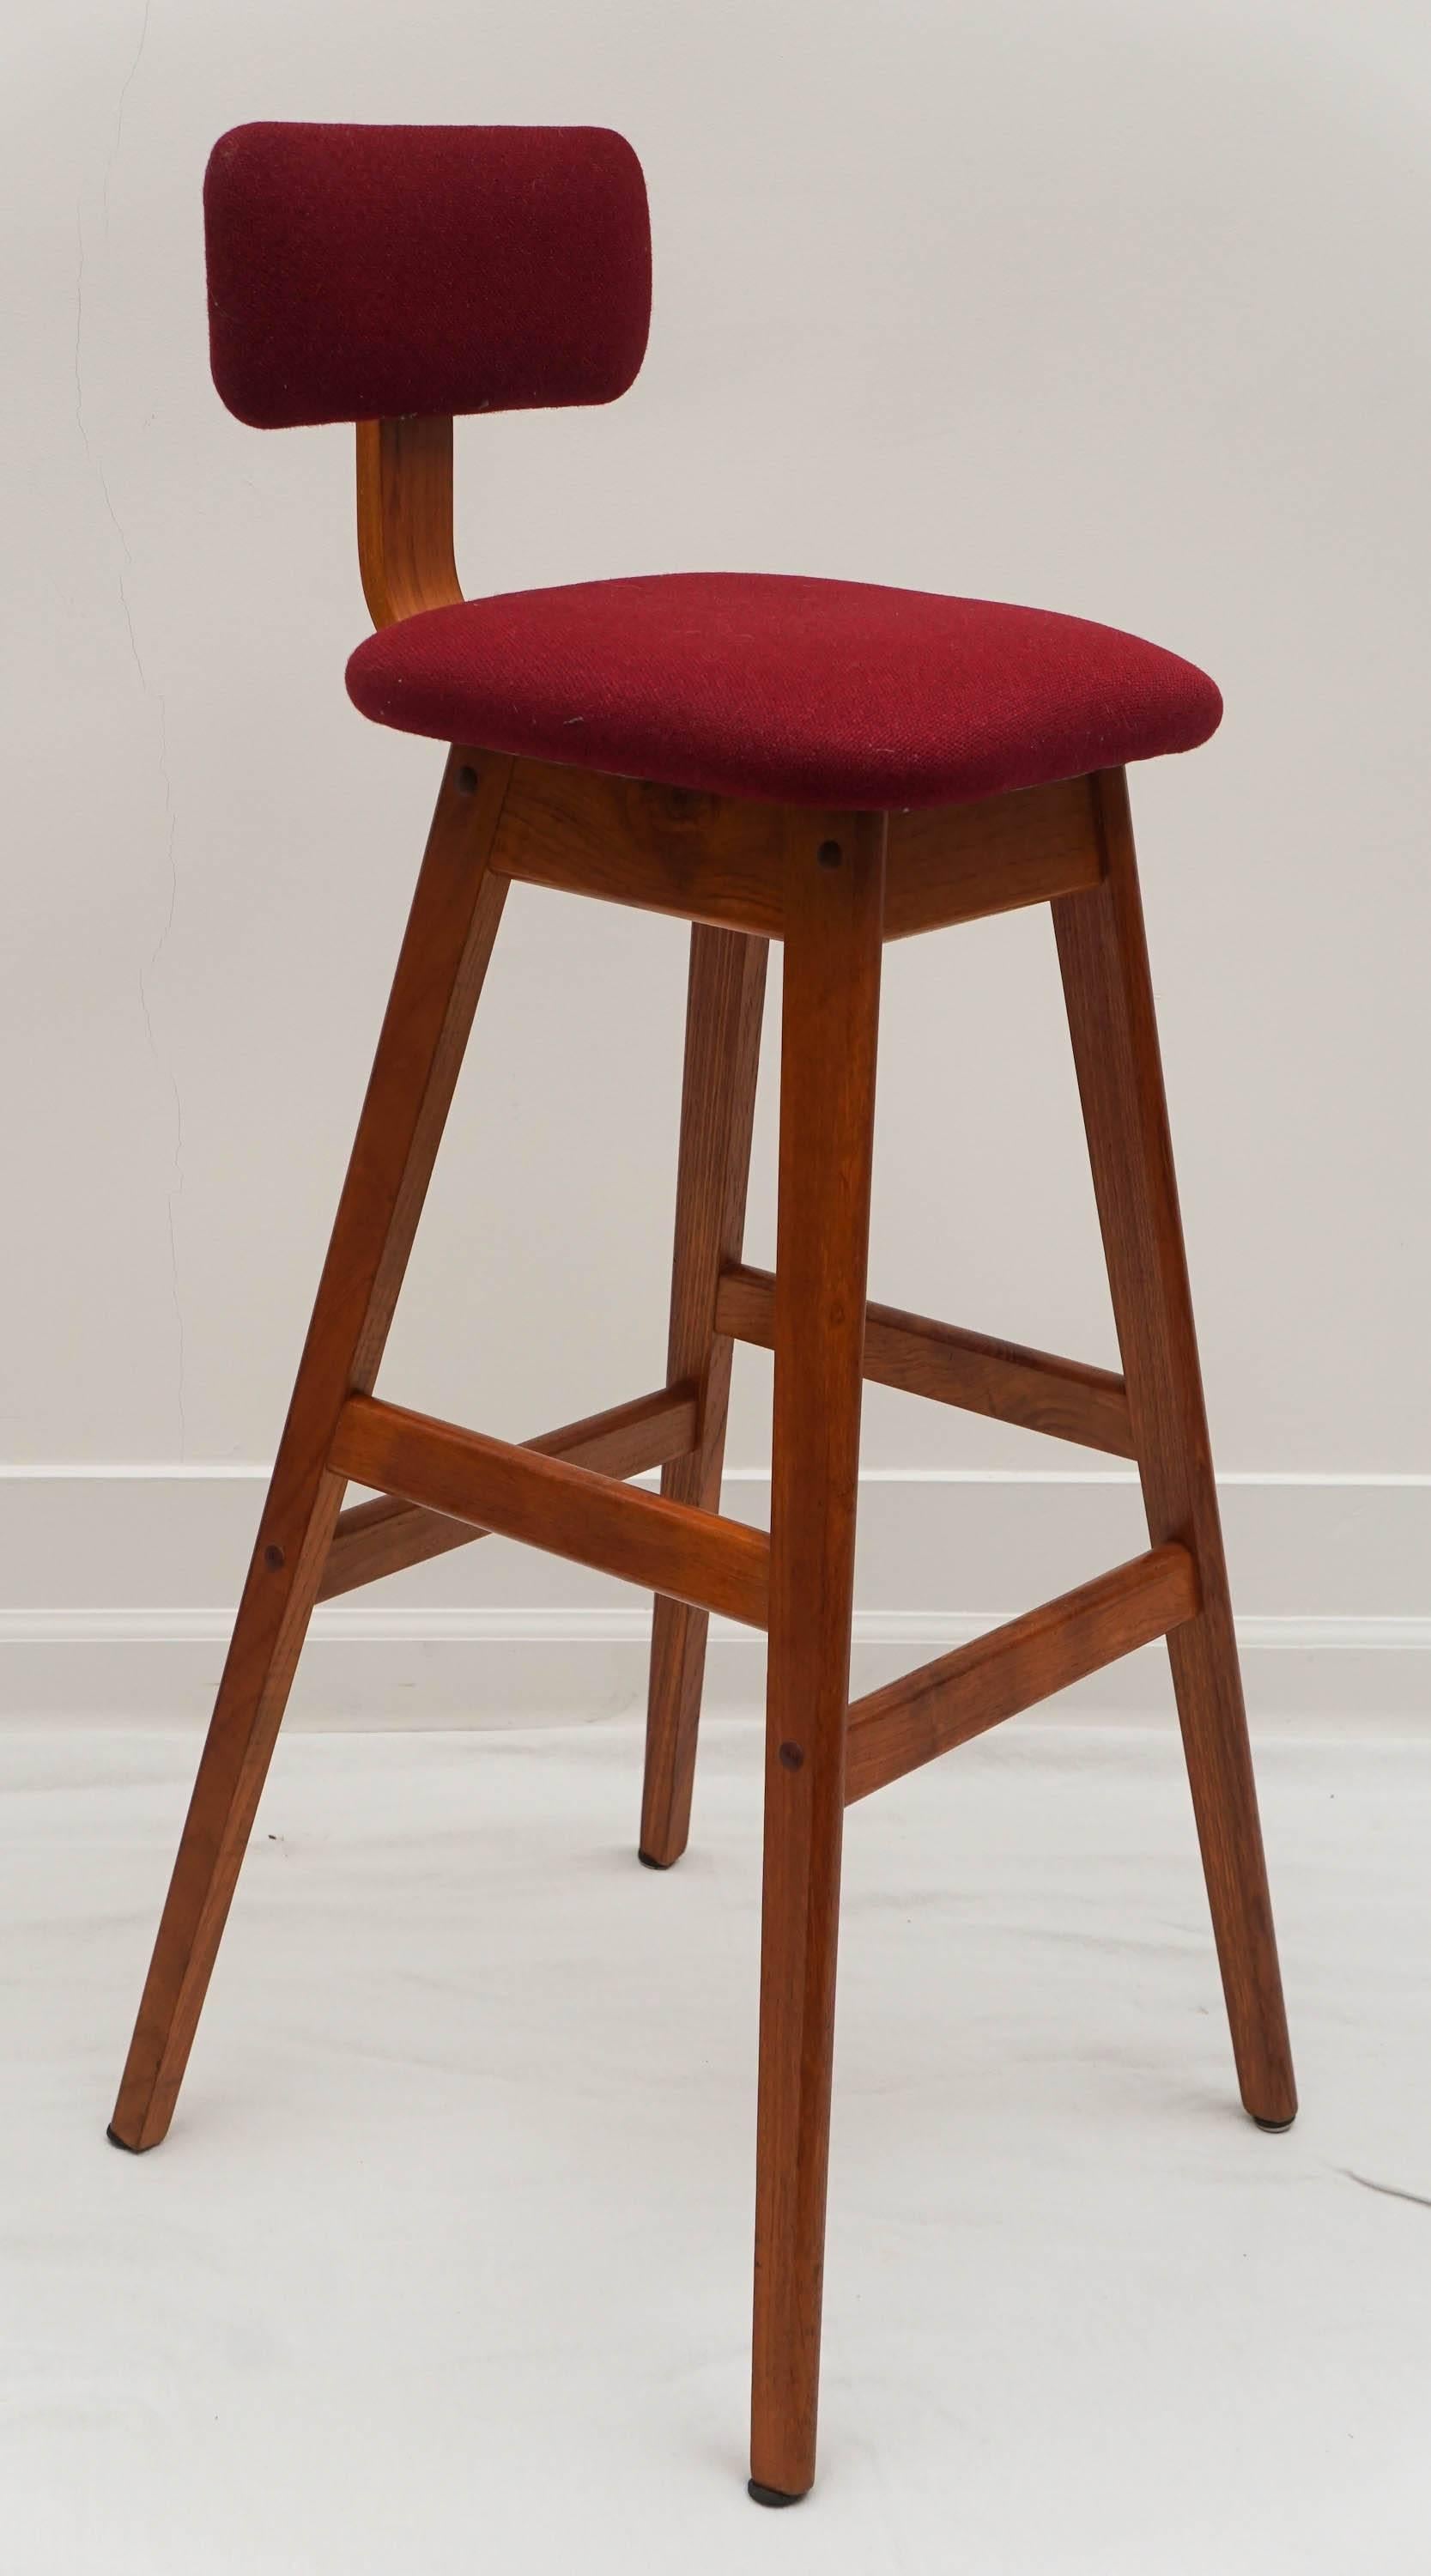 a great pair of Danish barstools.
they are lightweight yet sturdy.
condition is very good. Update them to leather or a fabric of your choice.